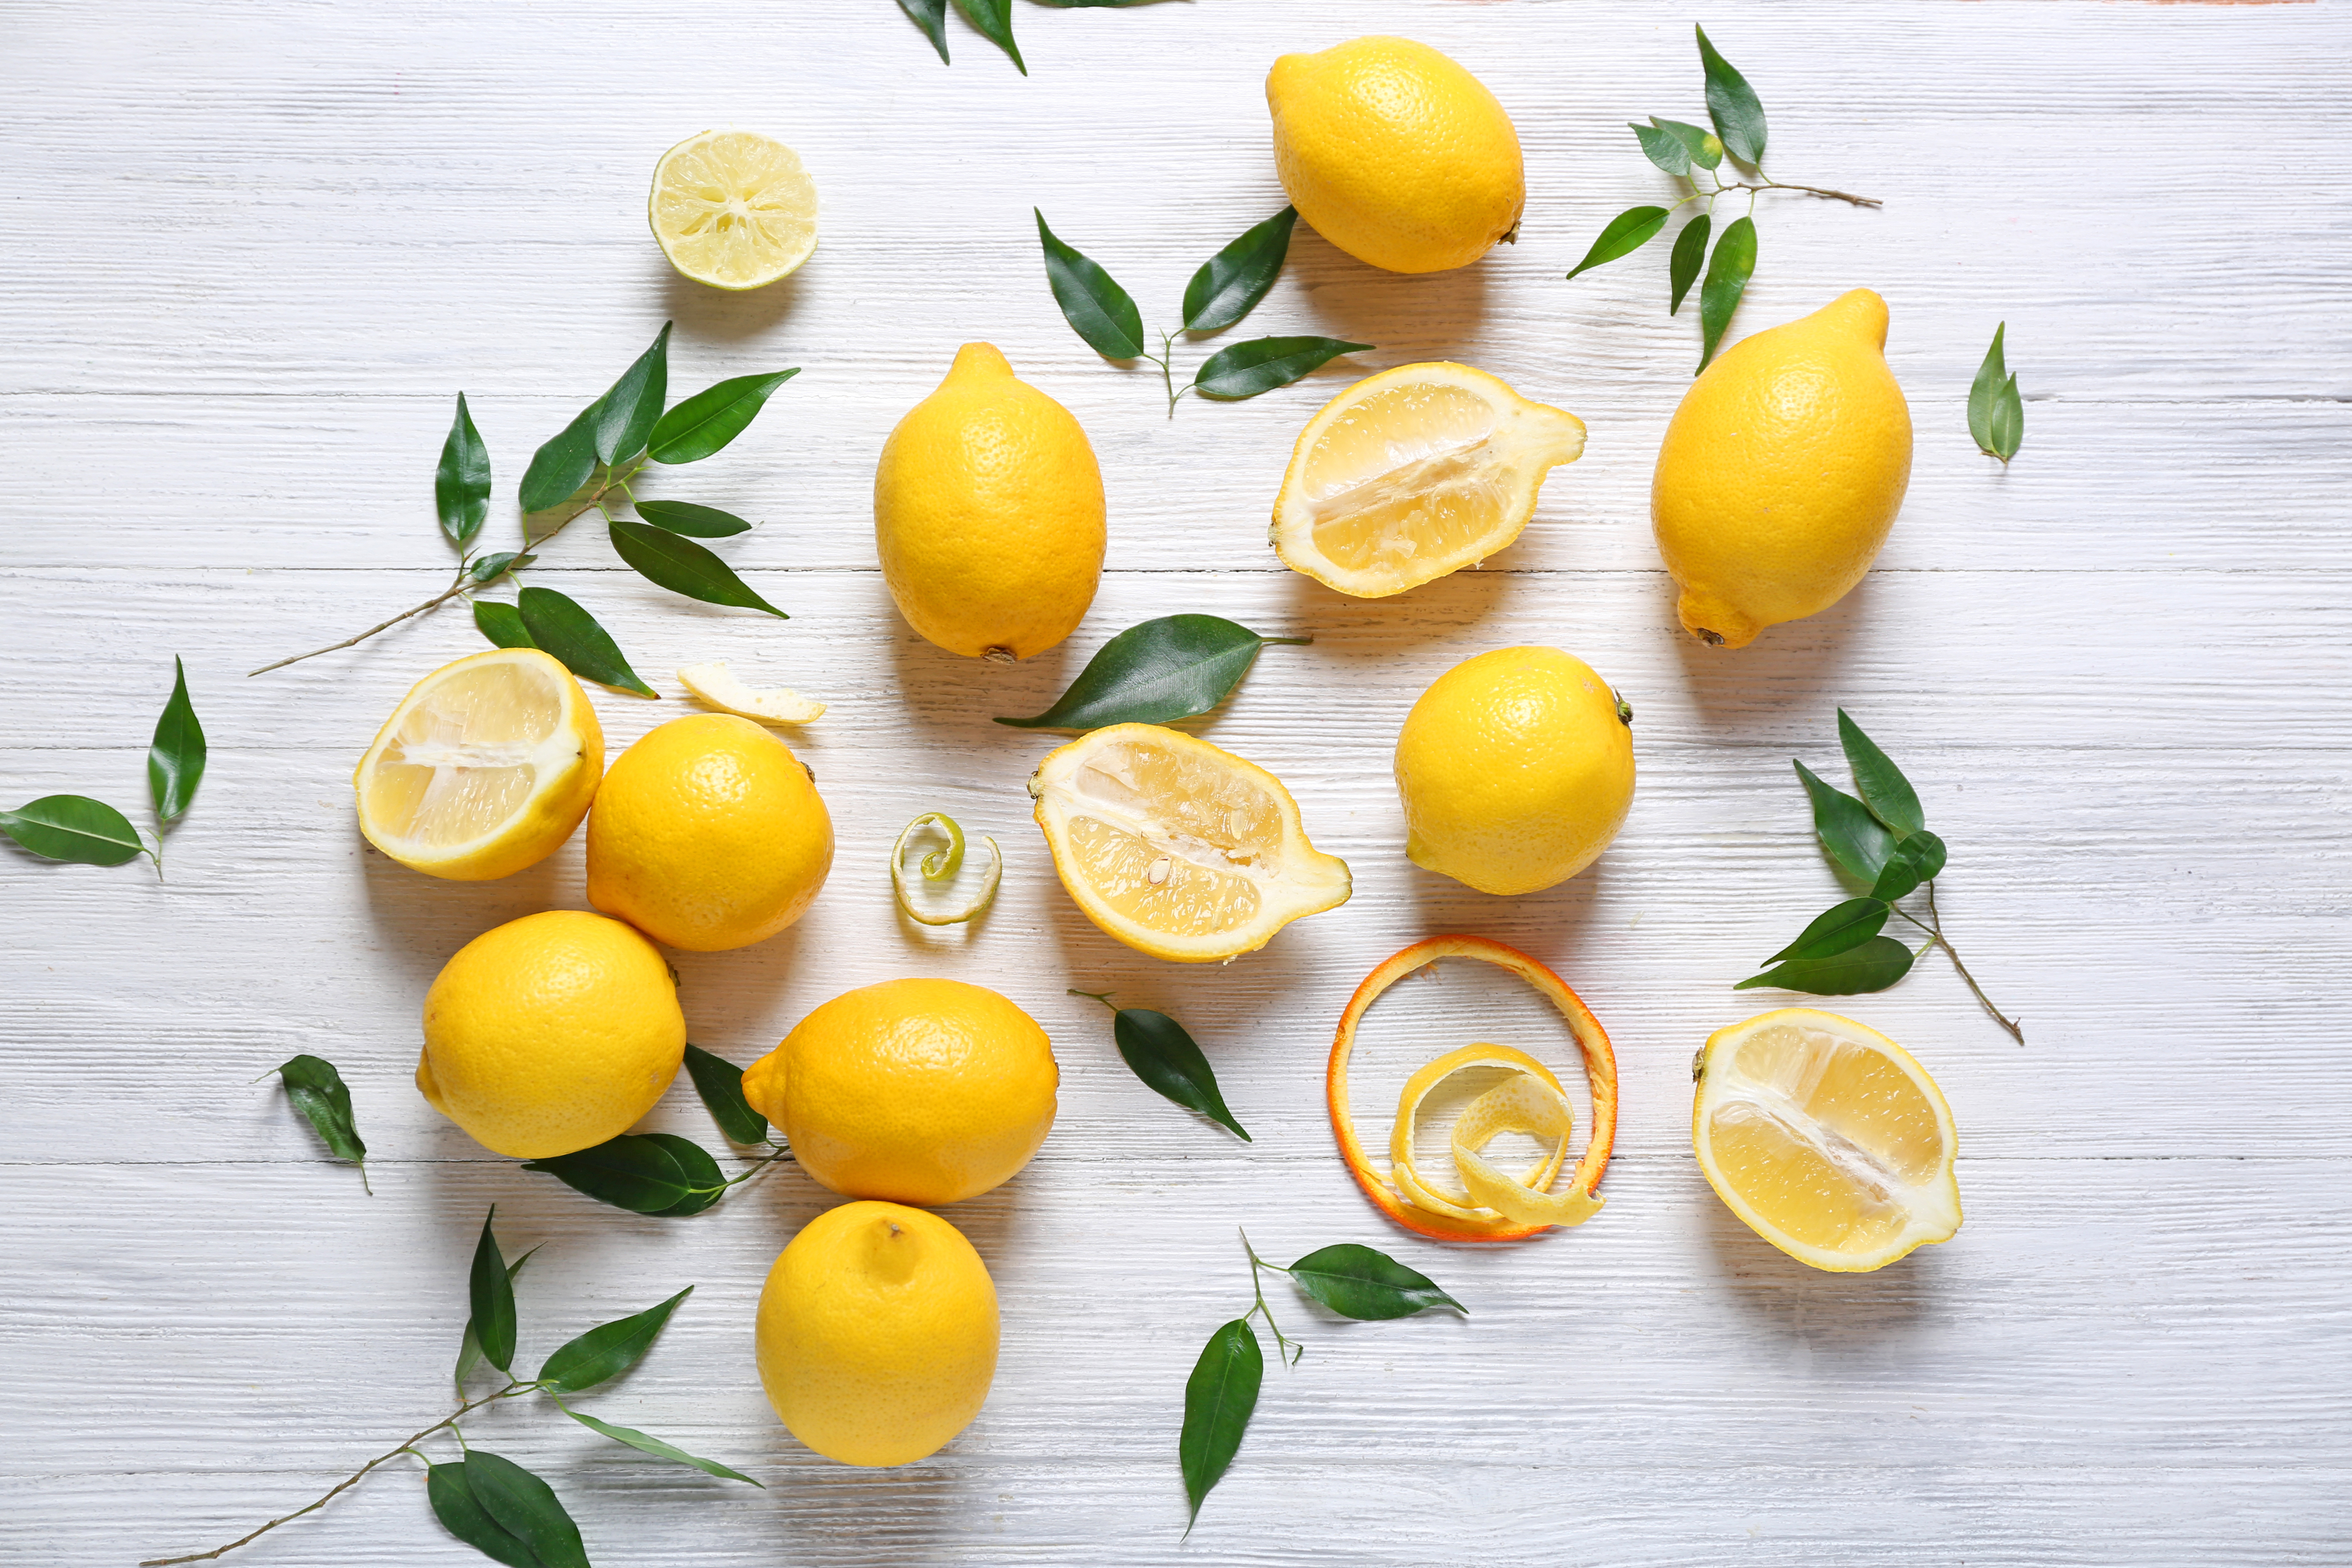 I Drank Lemon Water Every Day for a Week and This Is What Happened